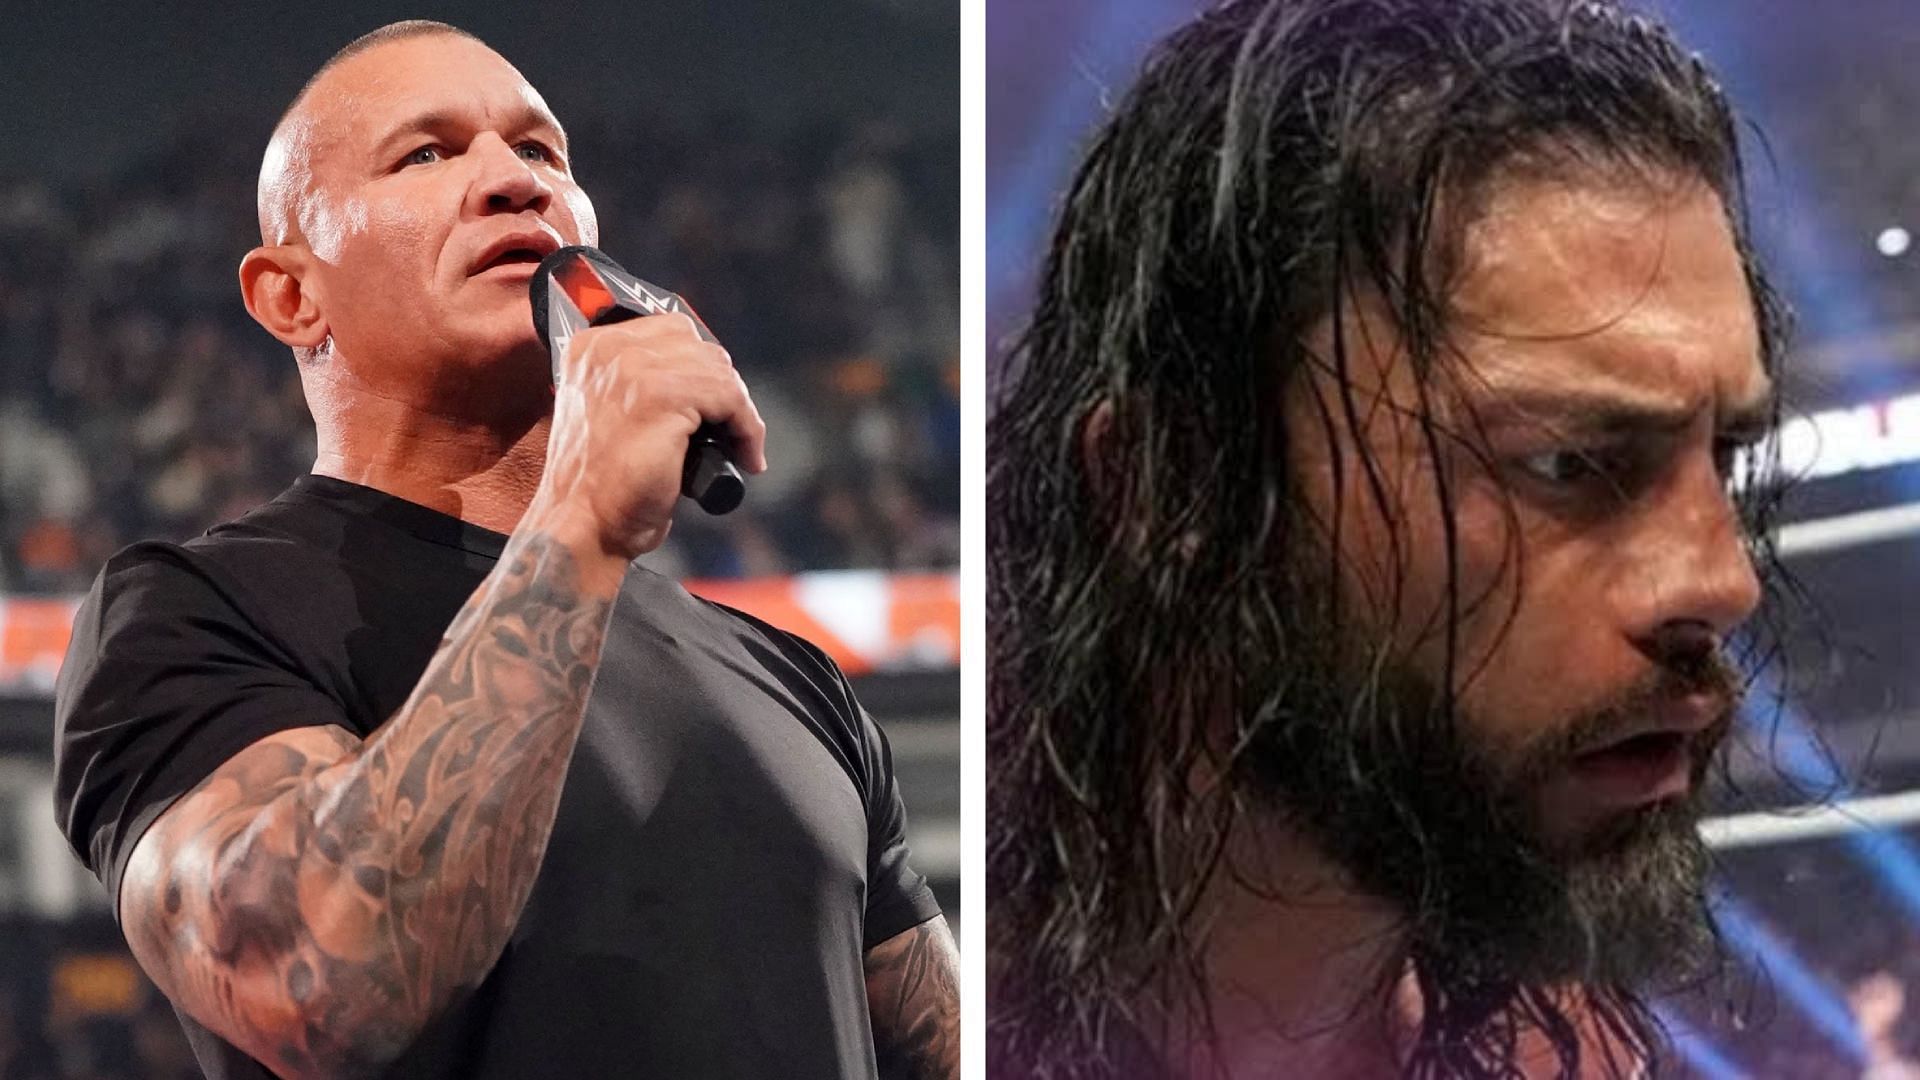 Roman Reigns could be concerned about Randy Orton